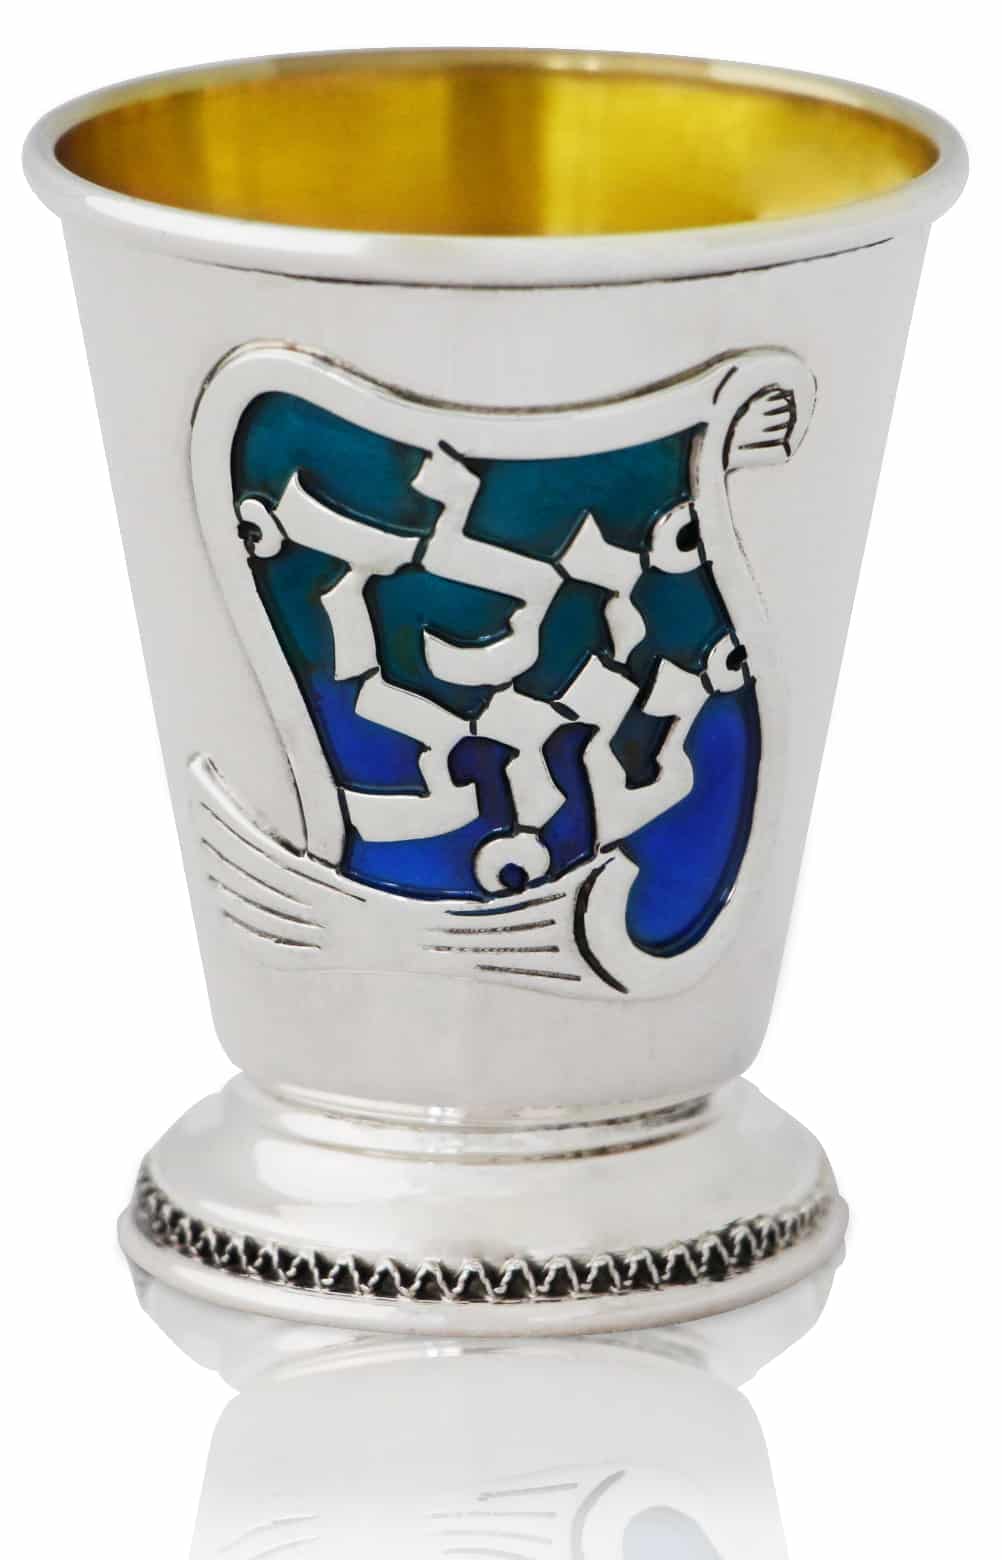 Small Sterling Silver Yeled Tov Silver Cup